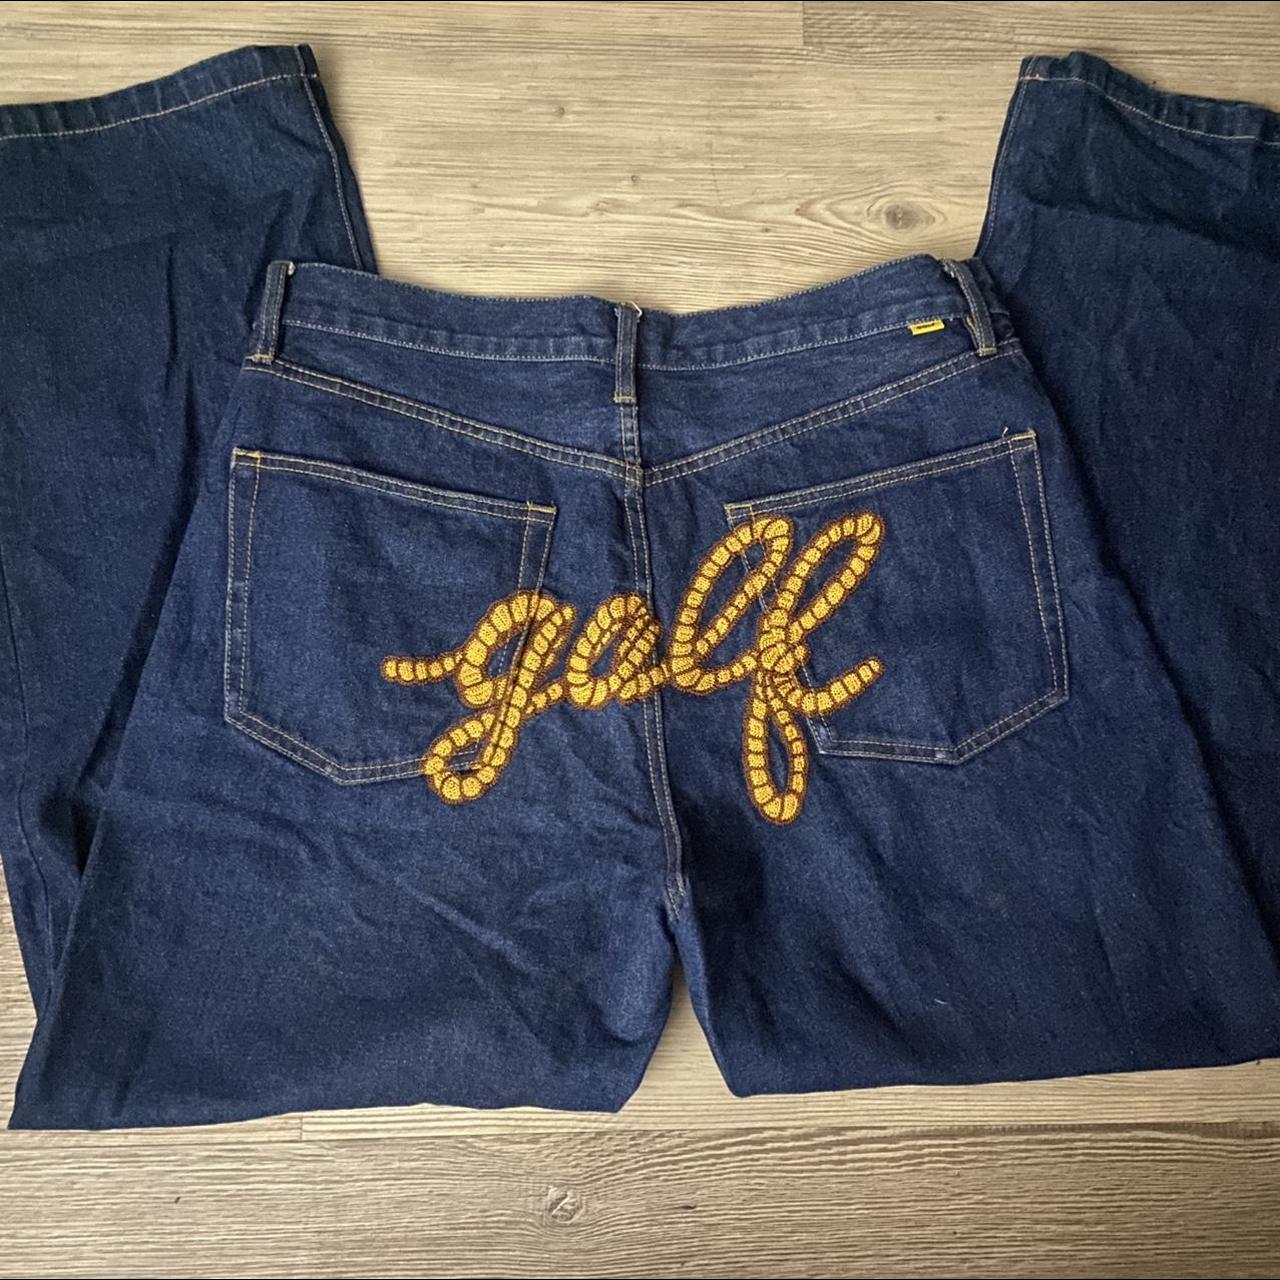 Golf Wang Men's Navy and Yellow Jeans